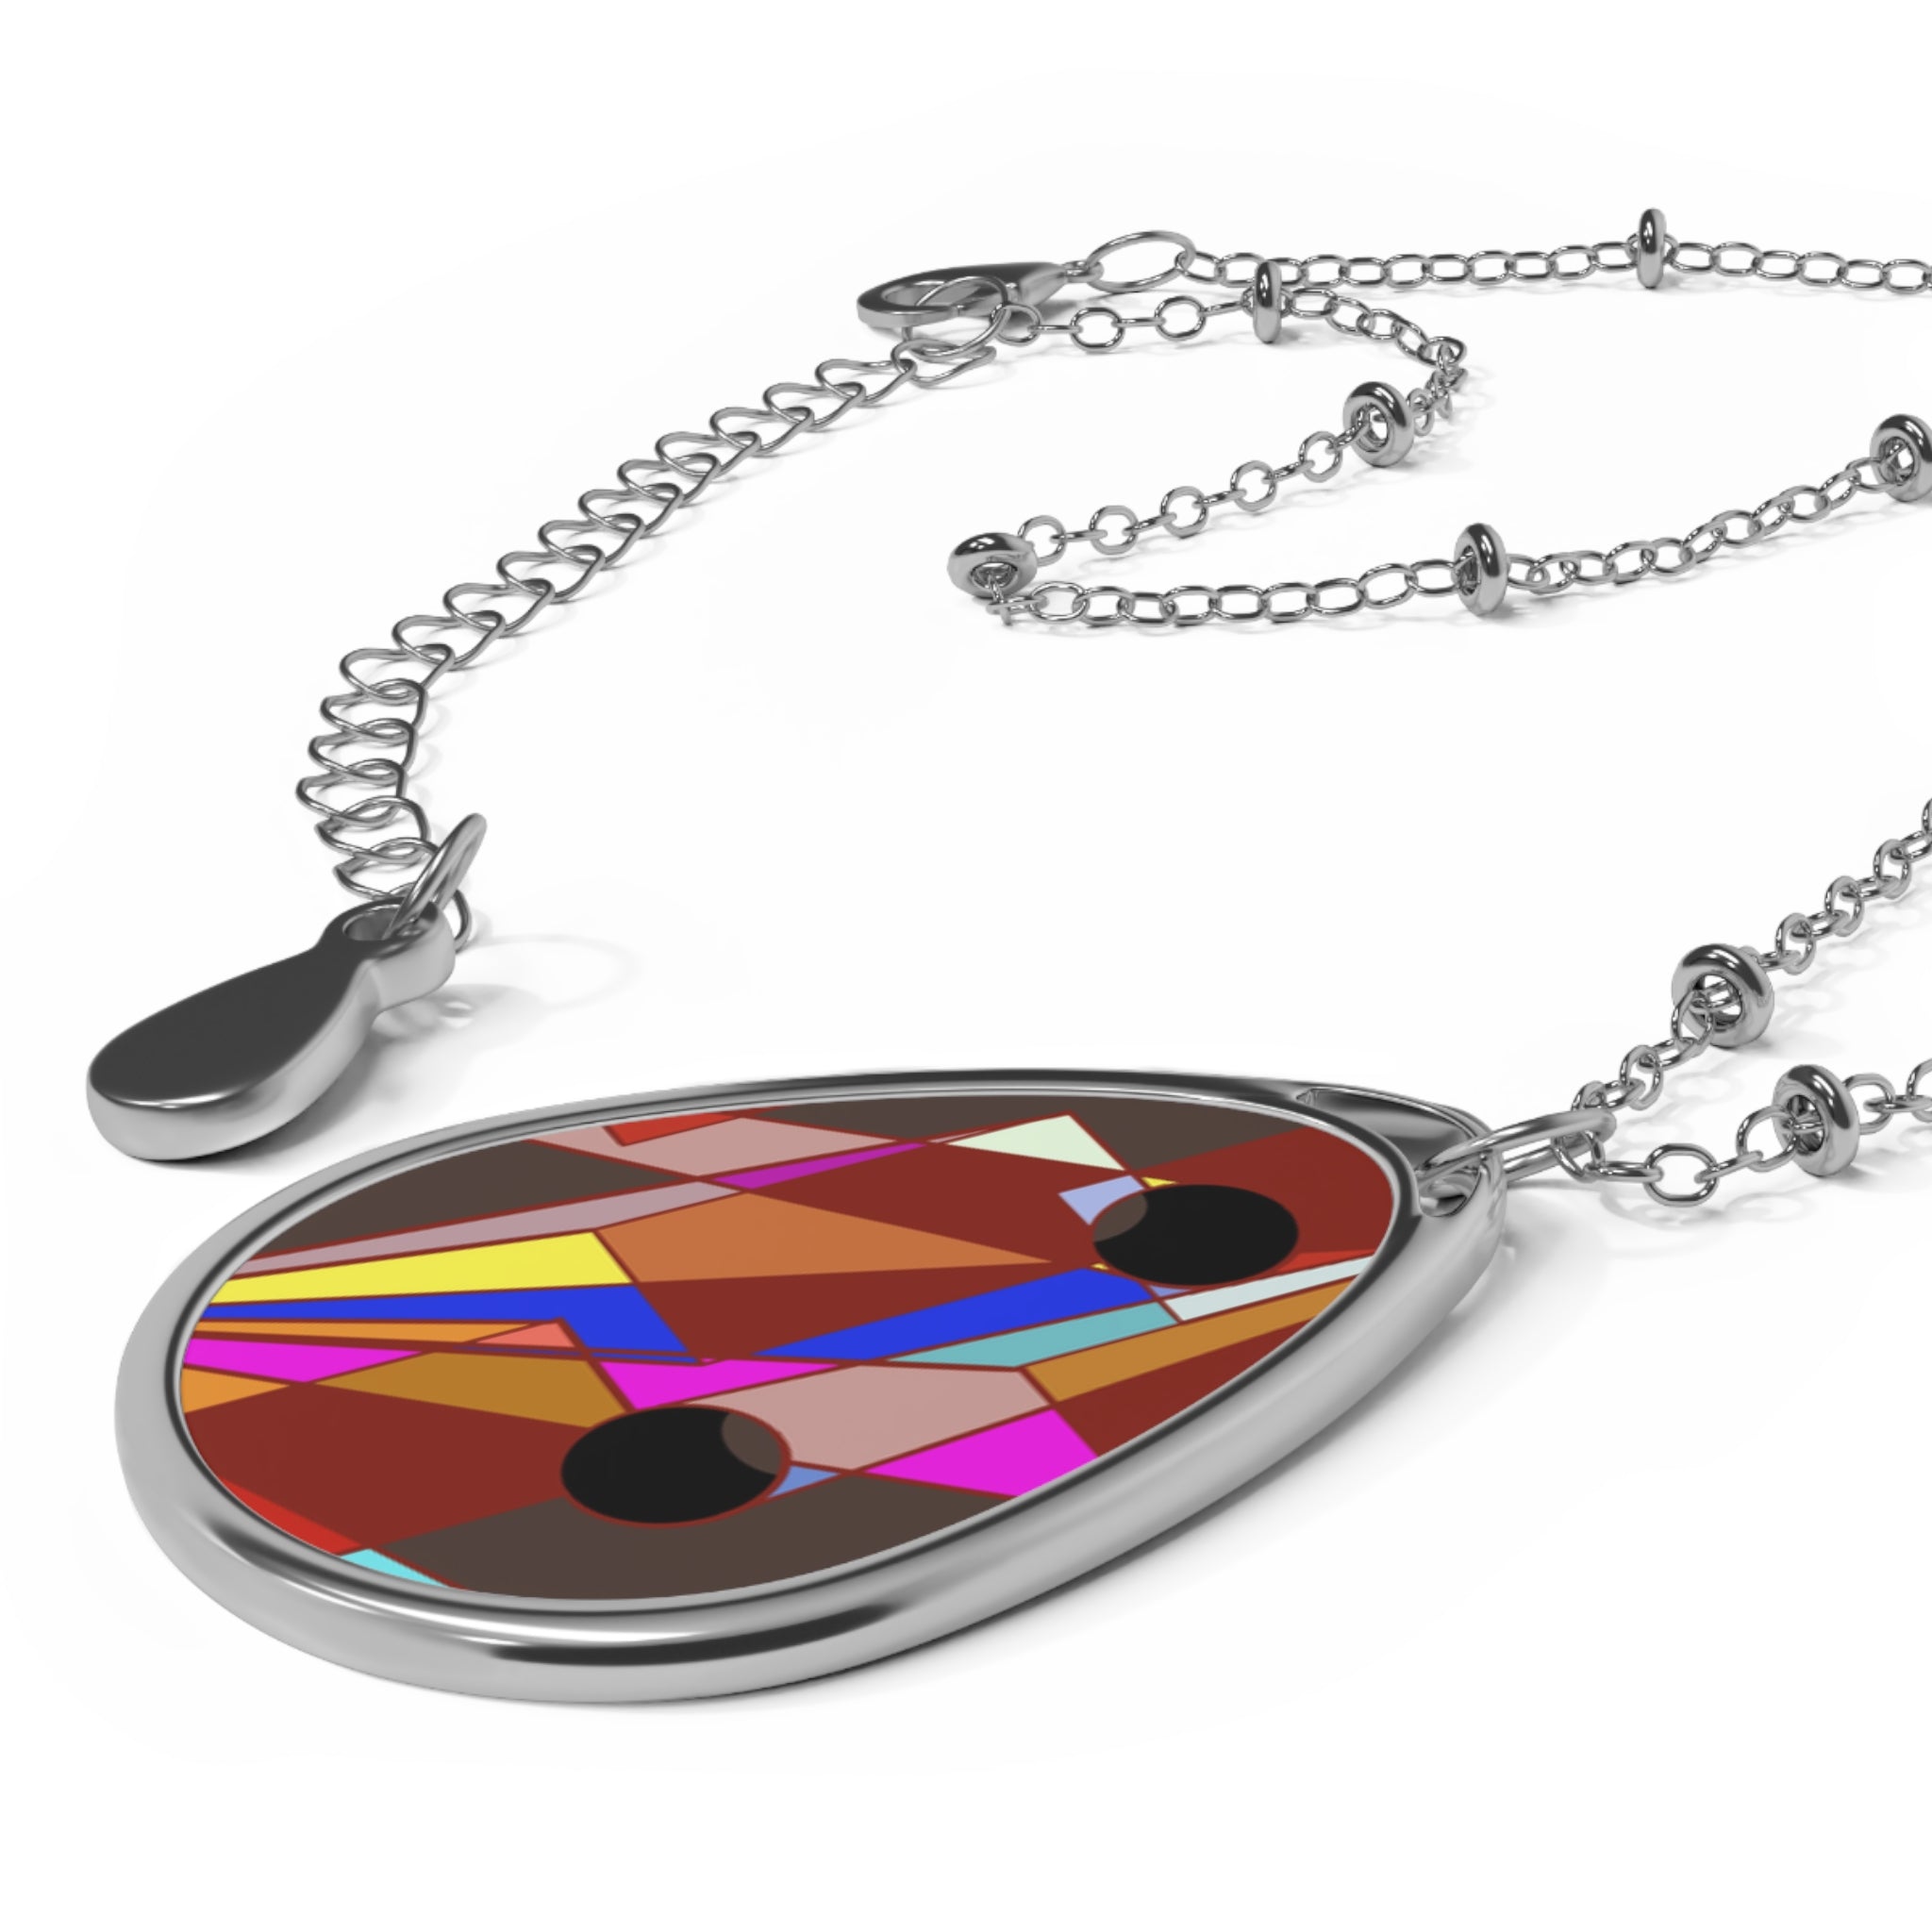 Ambient Pendant Necklace by @johnnygraff31